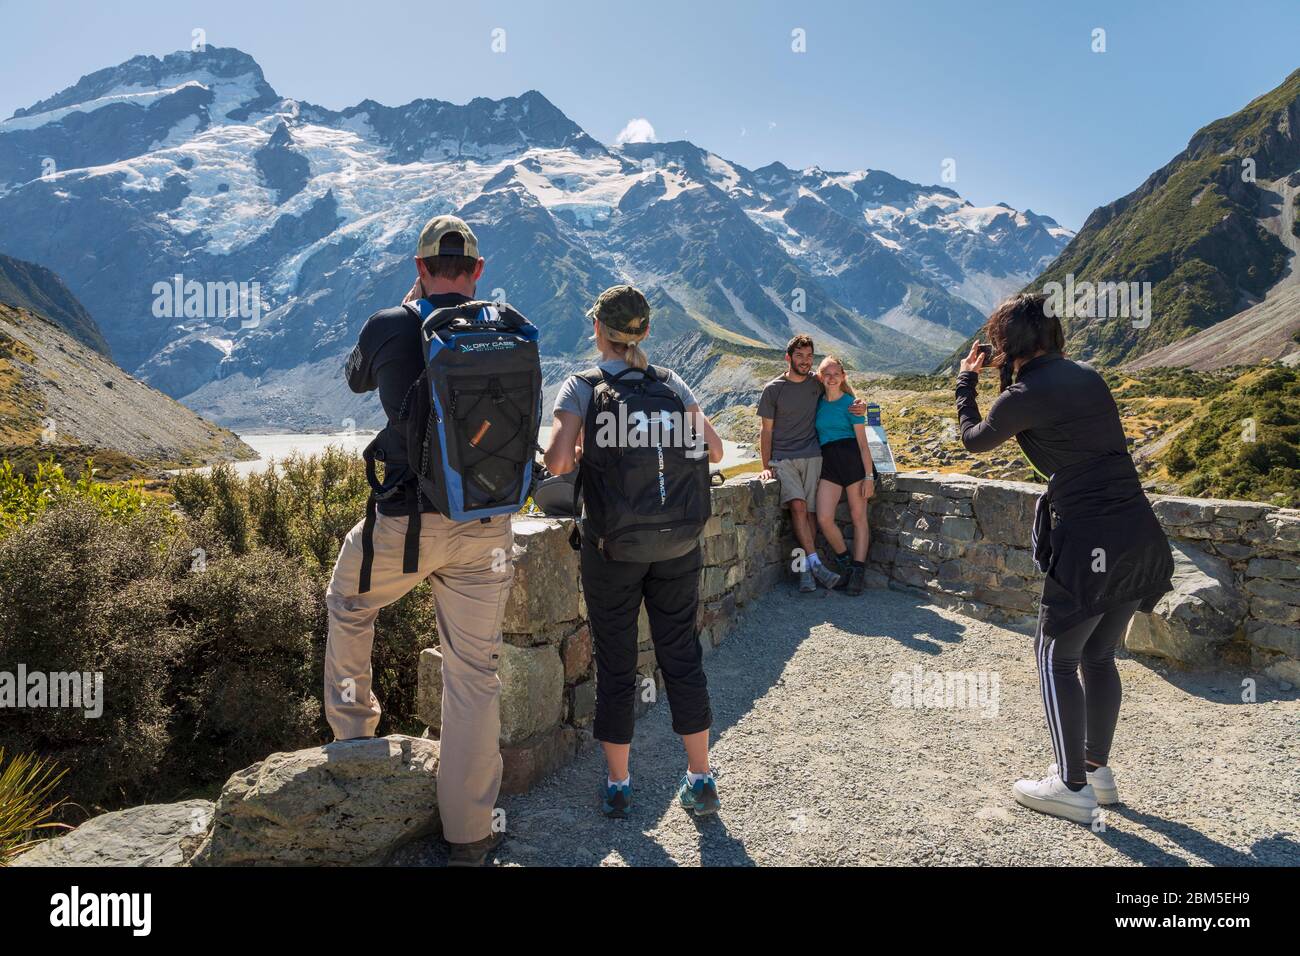 Tourists taking photos on the Hooker Valley Track with a backdrop of Mount Sefton, Aoraki Mount Cook National Park, South Island, New Zealand Stock Photo